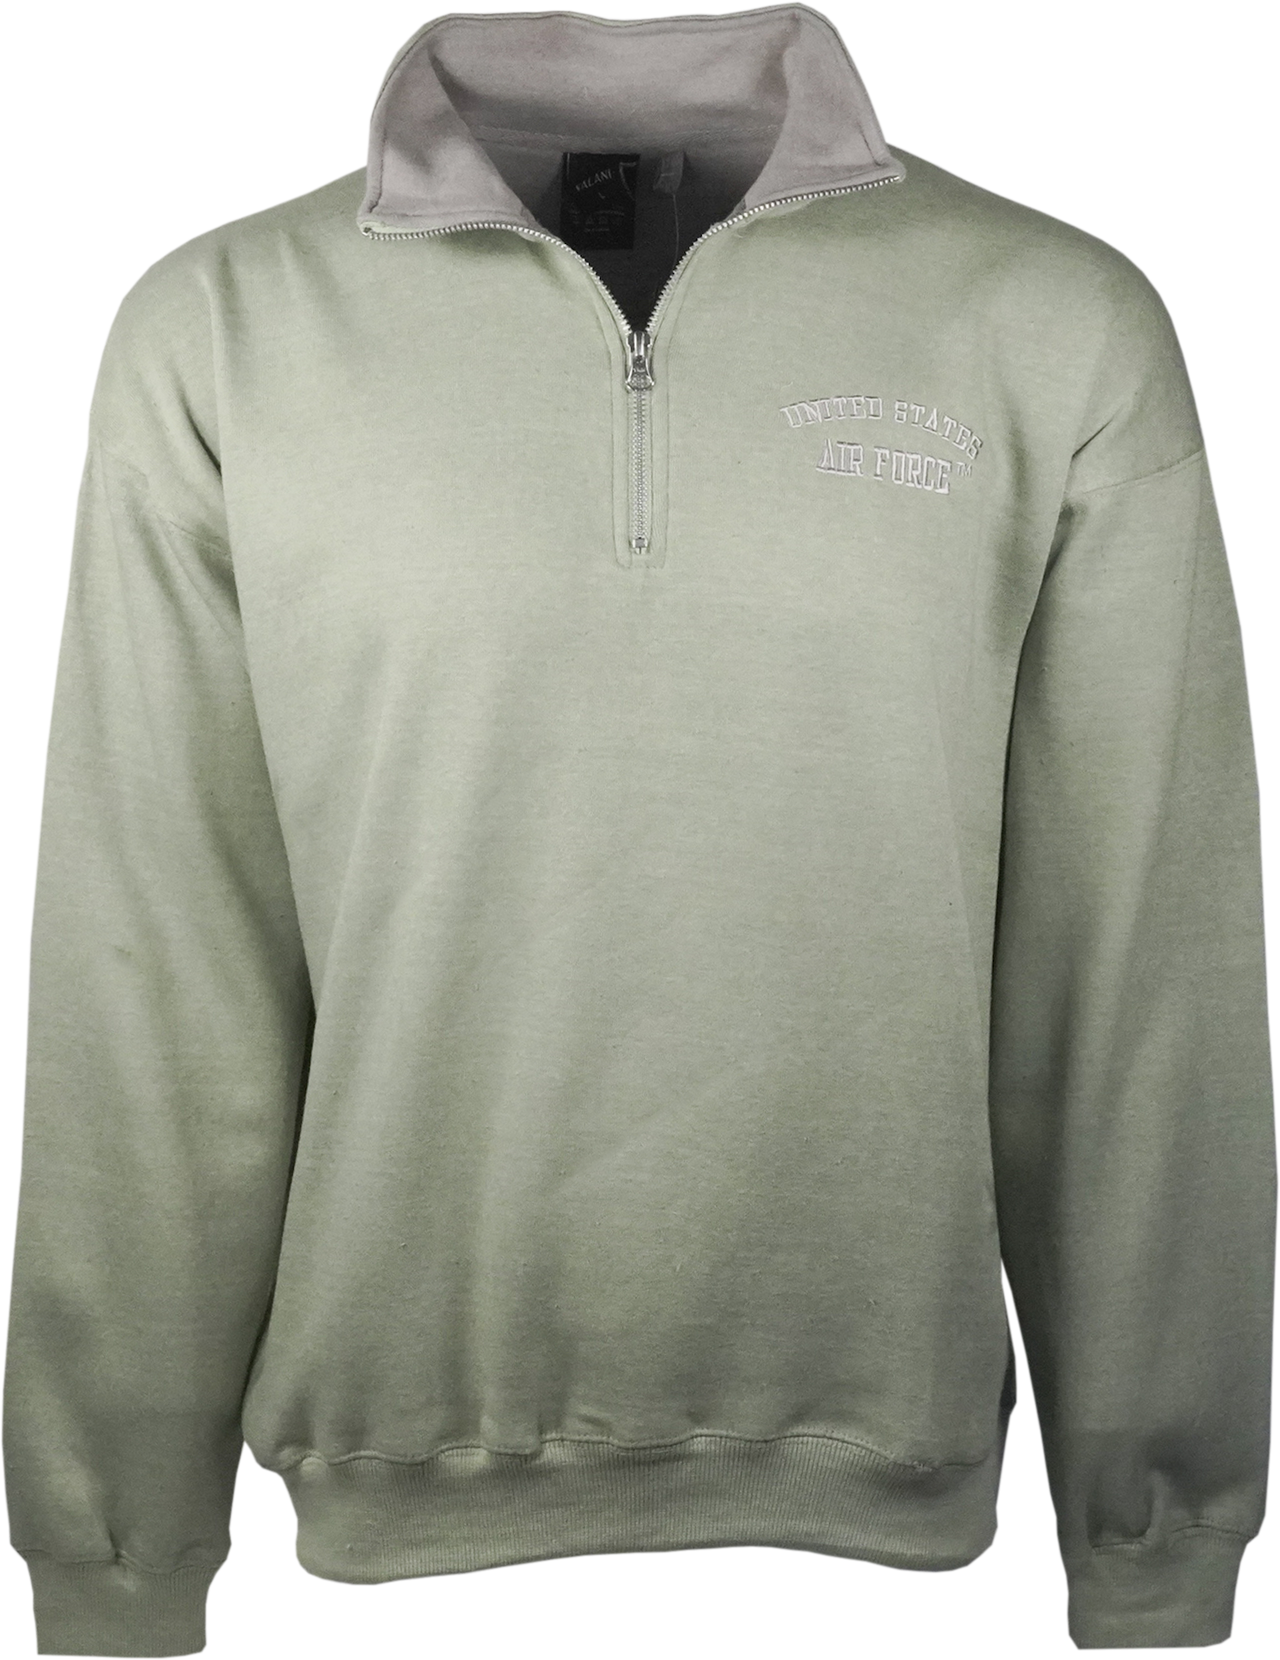 United States Air Force on Fleece 1/4 Zip Pullover